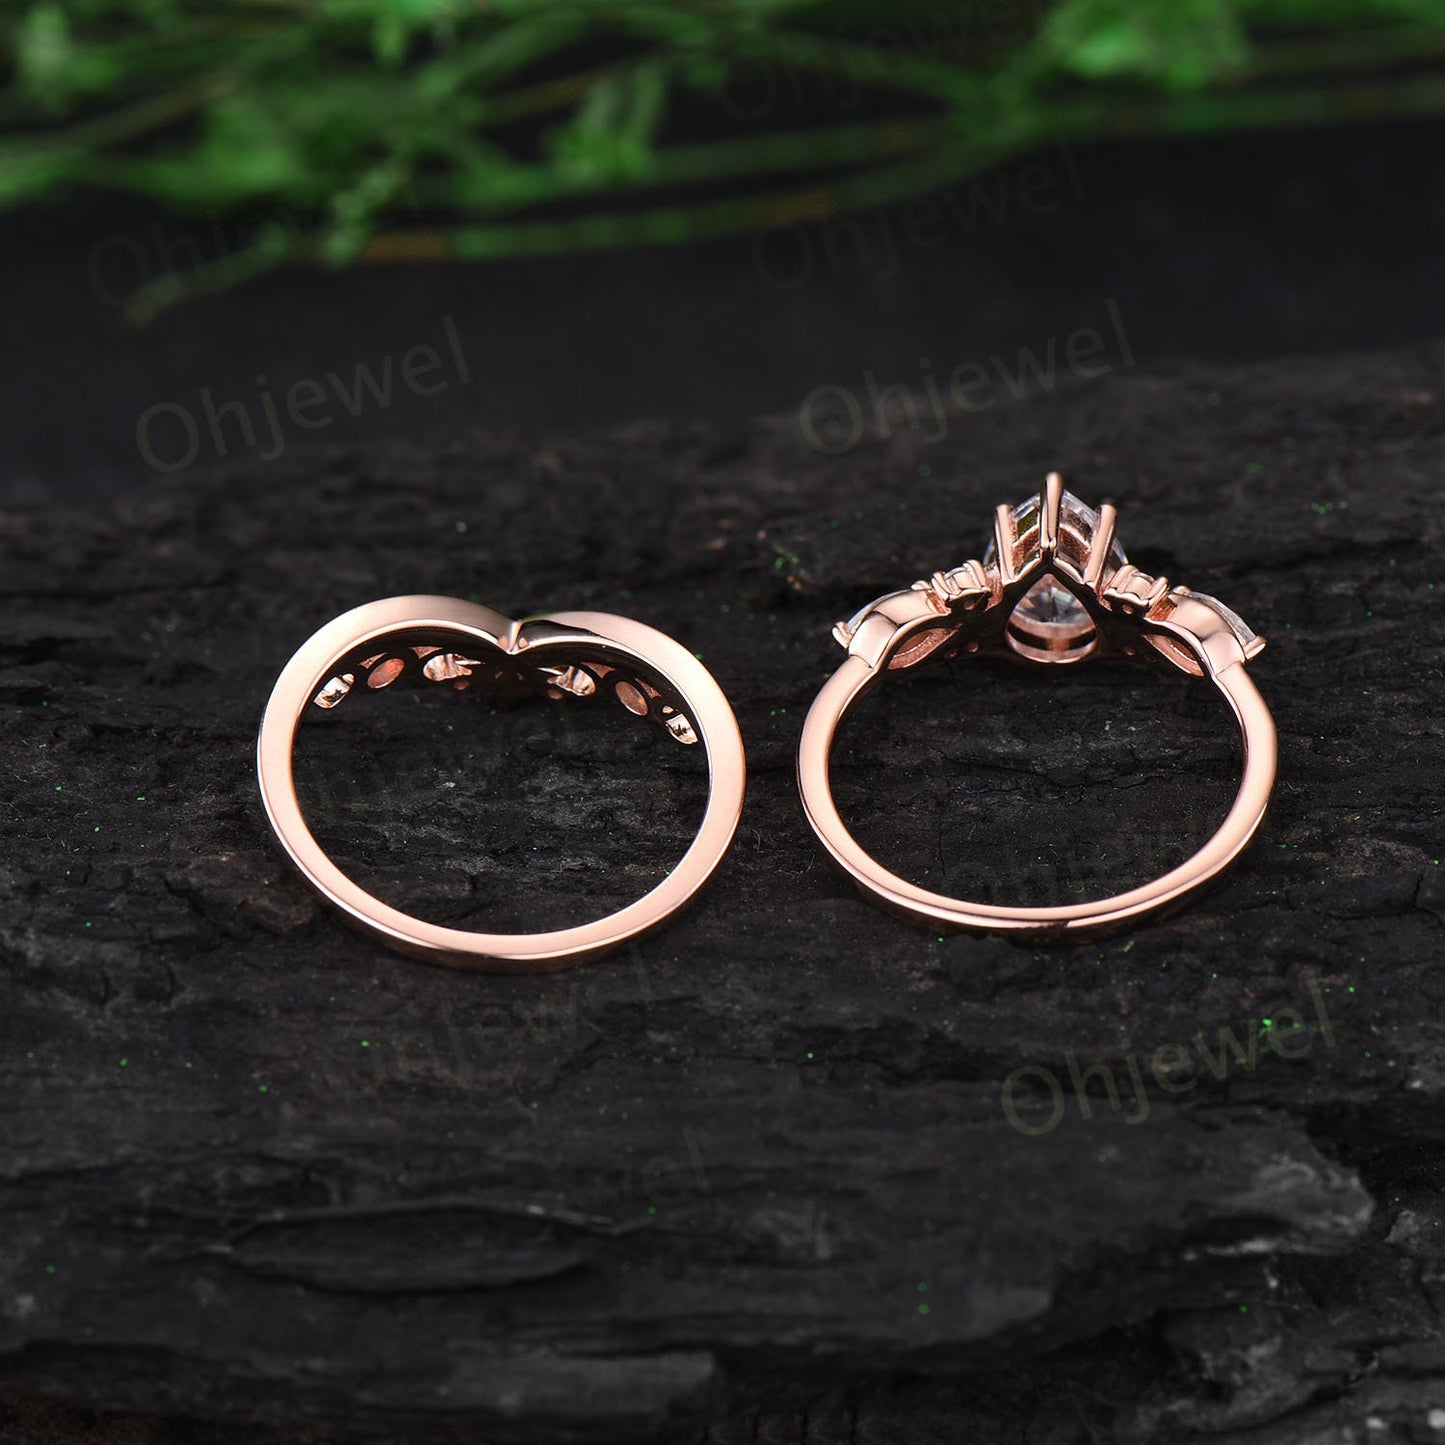 Pear shaped white opal ring vintage unique engagement ring art deco 14k rose gold leaf moonstone ring women twisted promise ring set gift